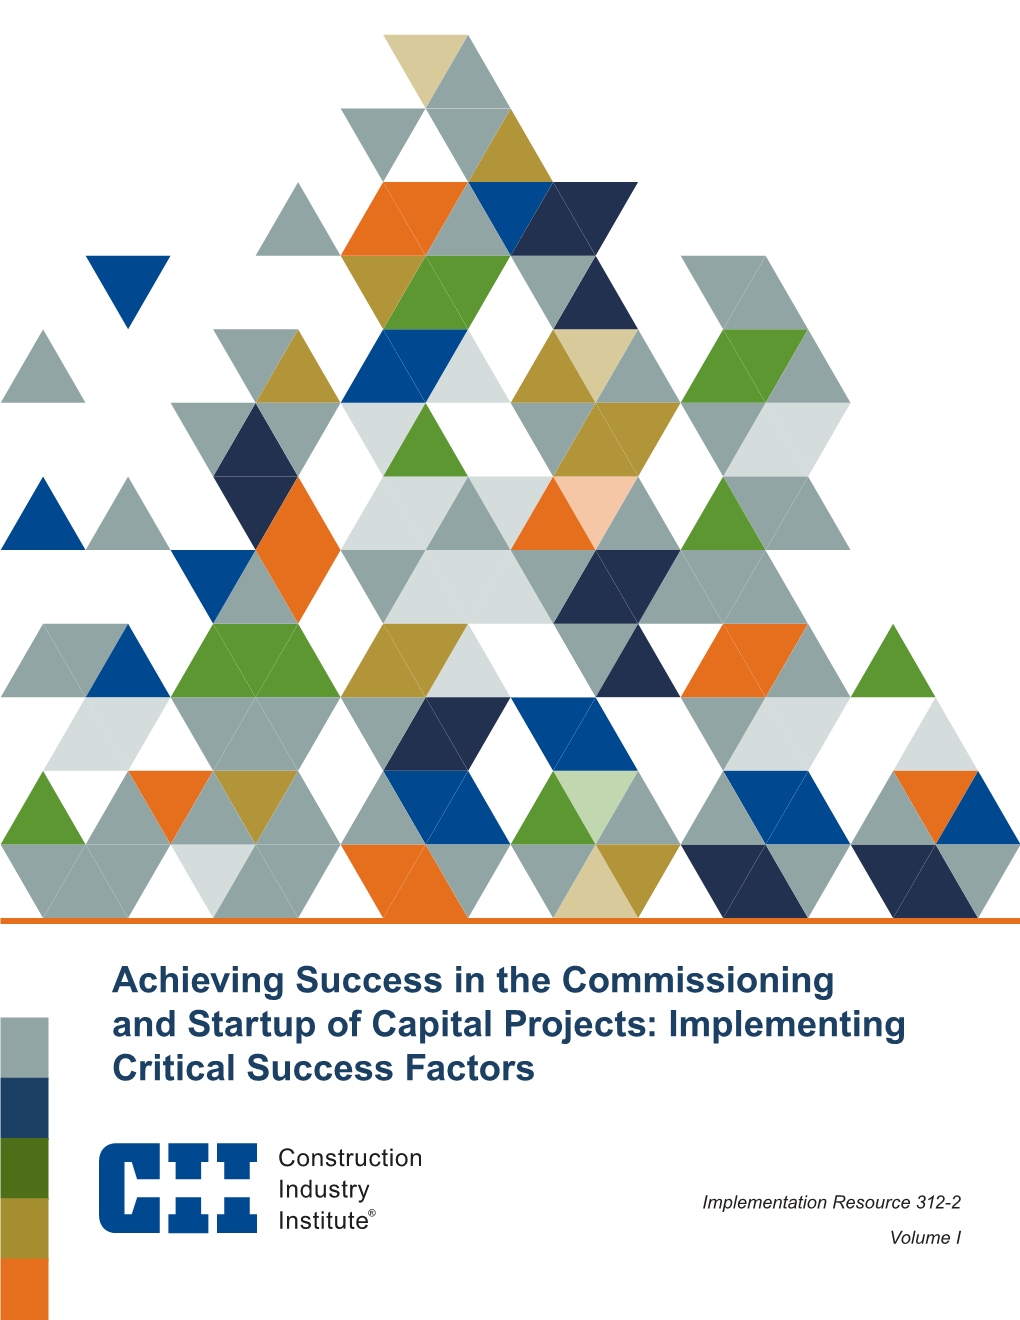 Achieving Success in the Commissioning and Startup of Capital Projects: Implementing Critical Success Factors